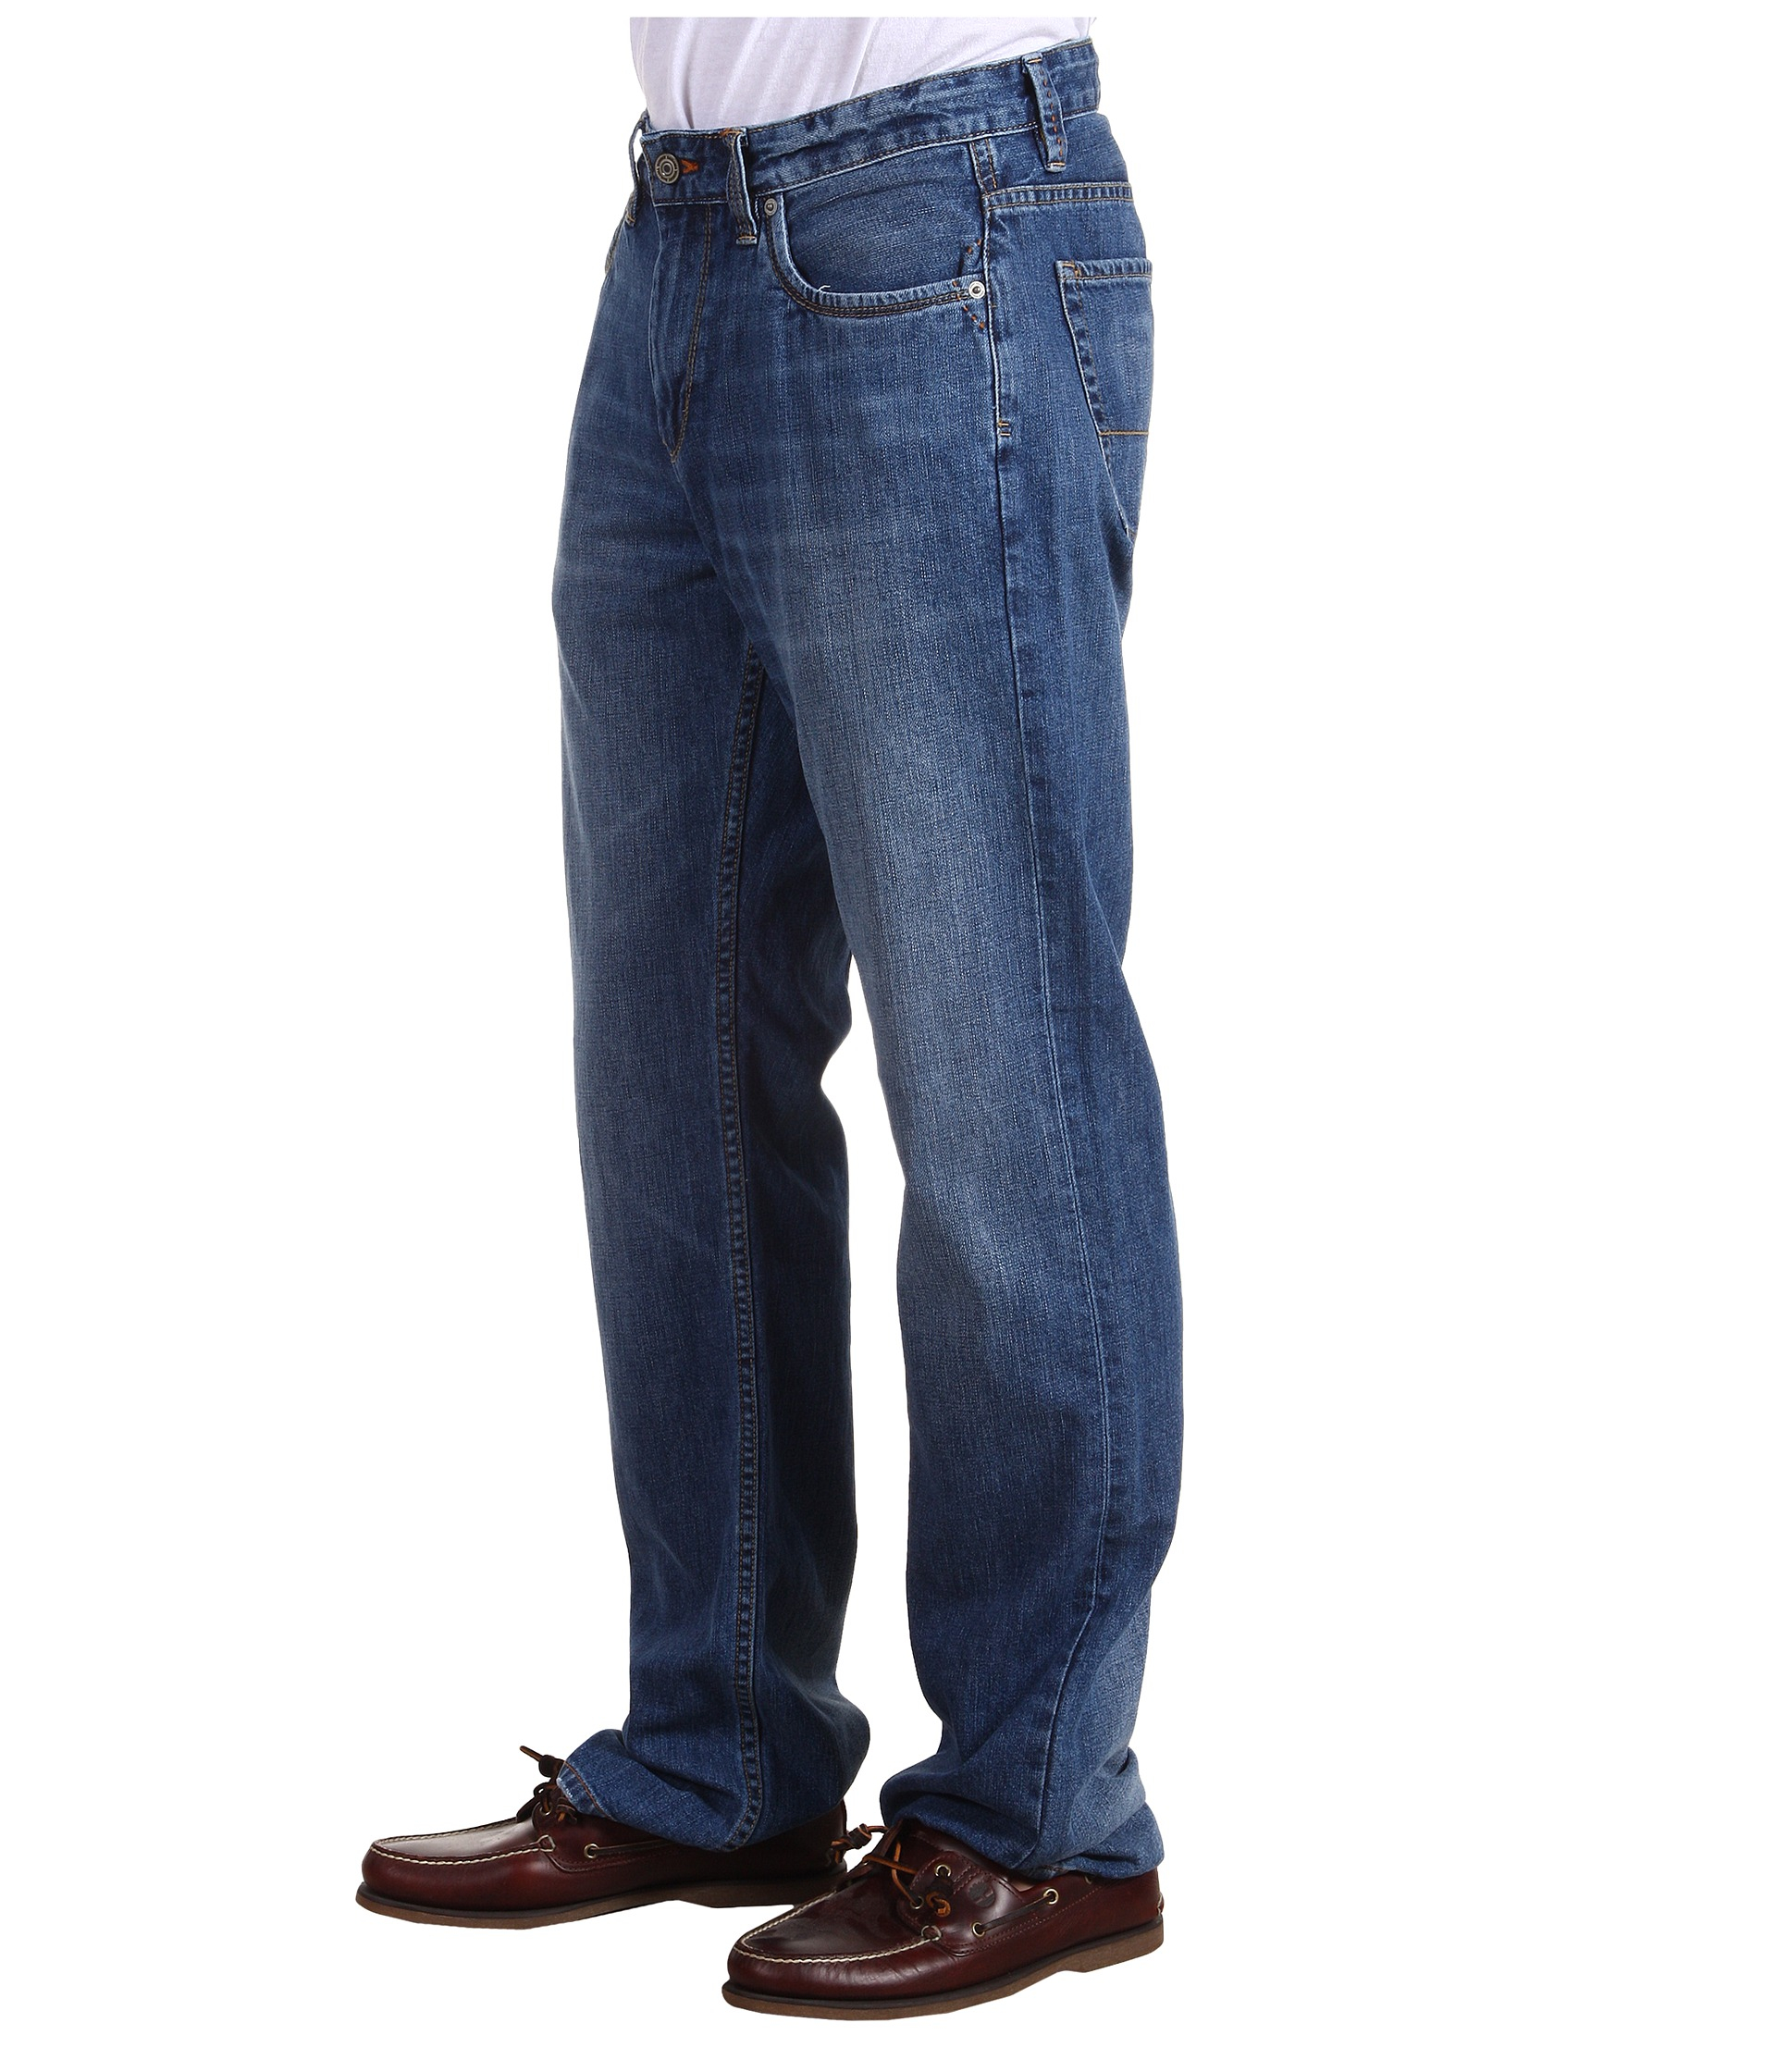 Lyst - Tommy Bahama Caymen Relaxed Jeans in Blue for Men